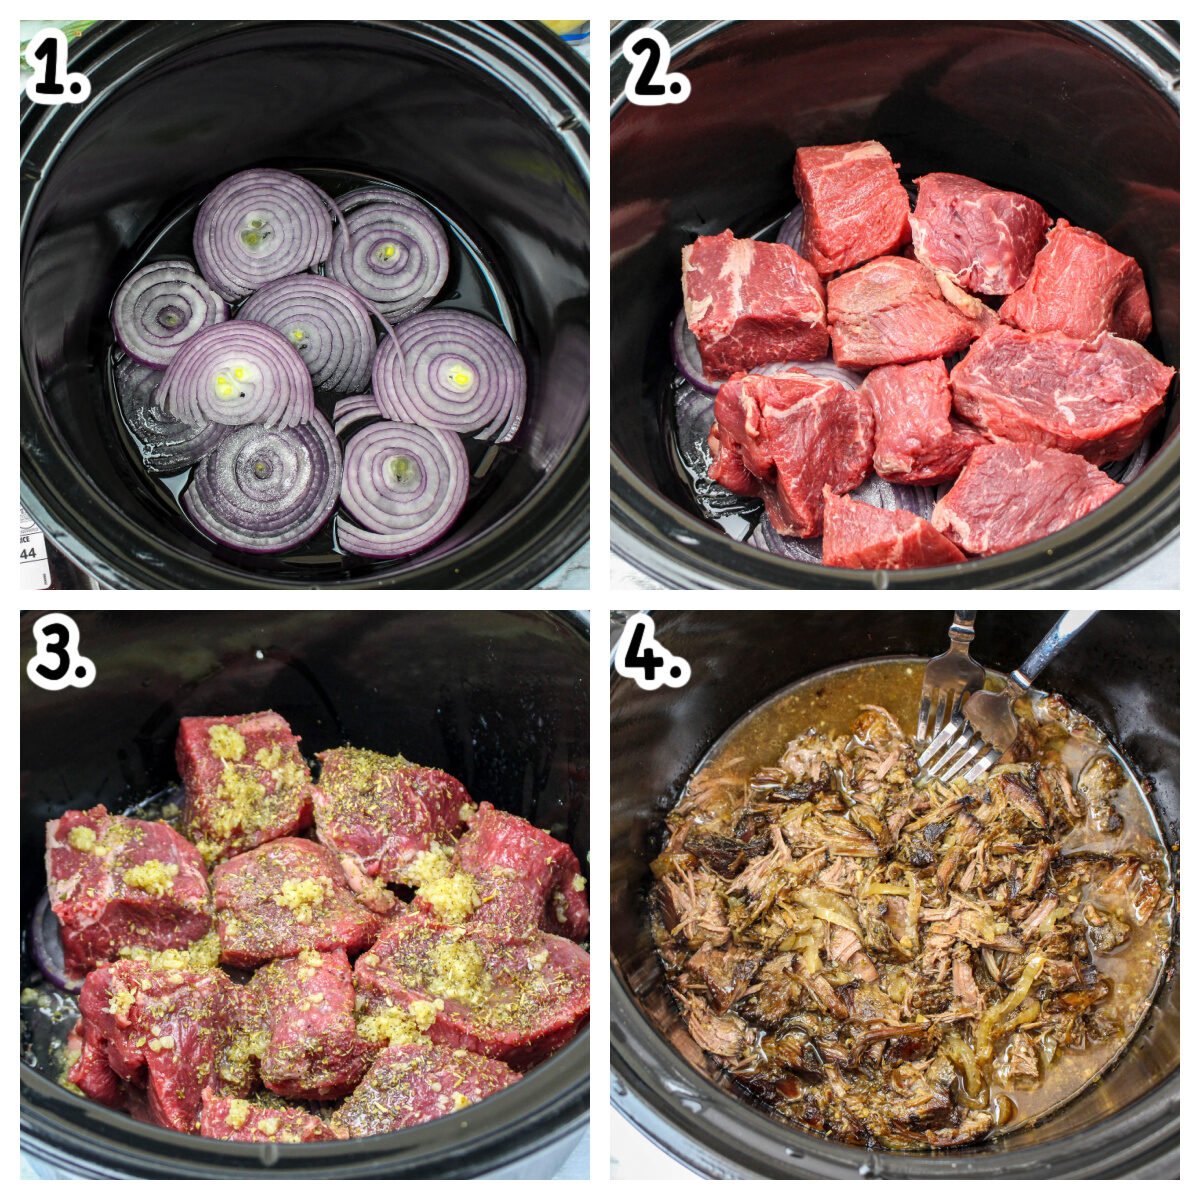 4 image collage on how to add ingredients to slow cooker for beef gryros.